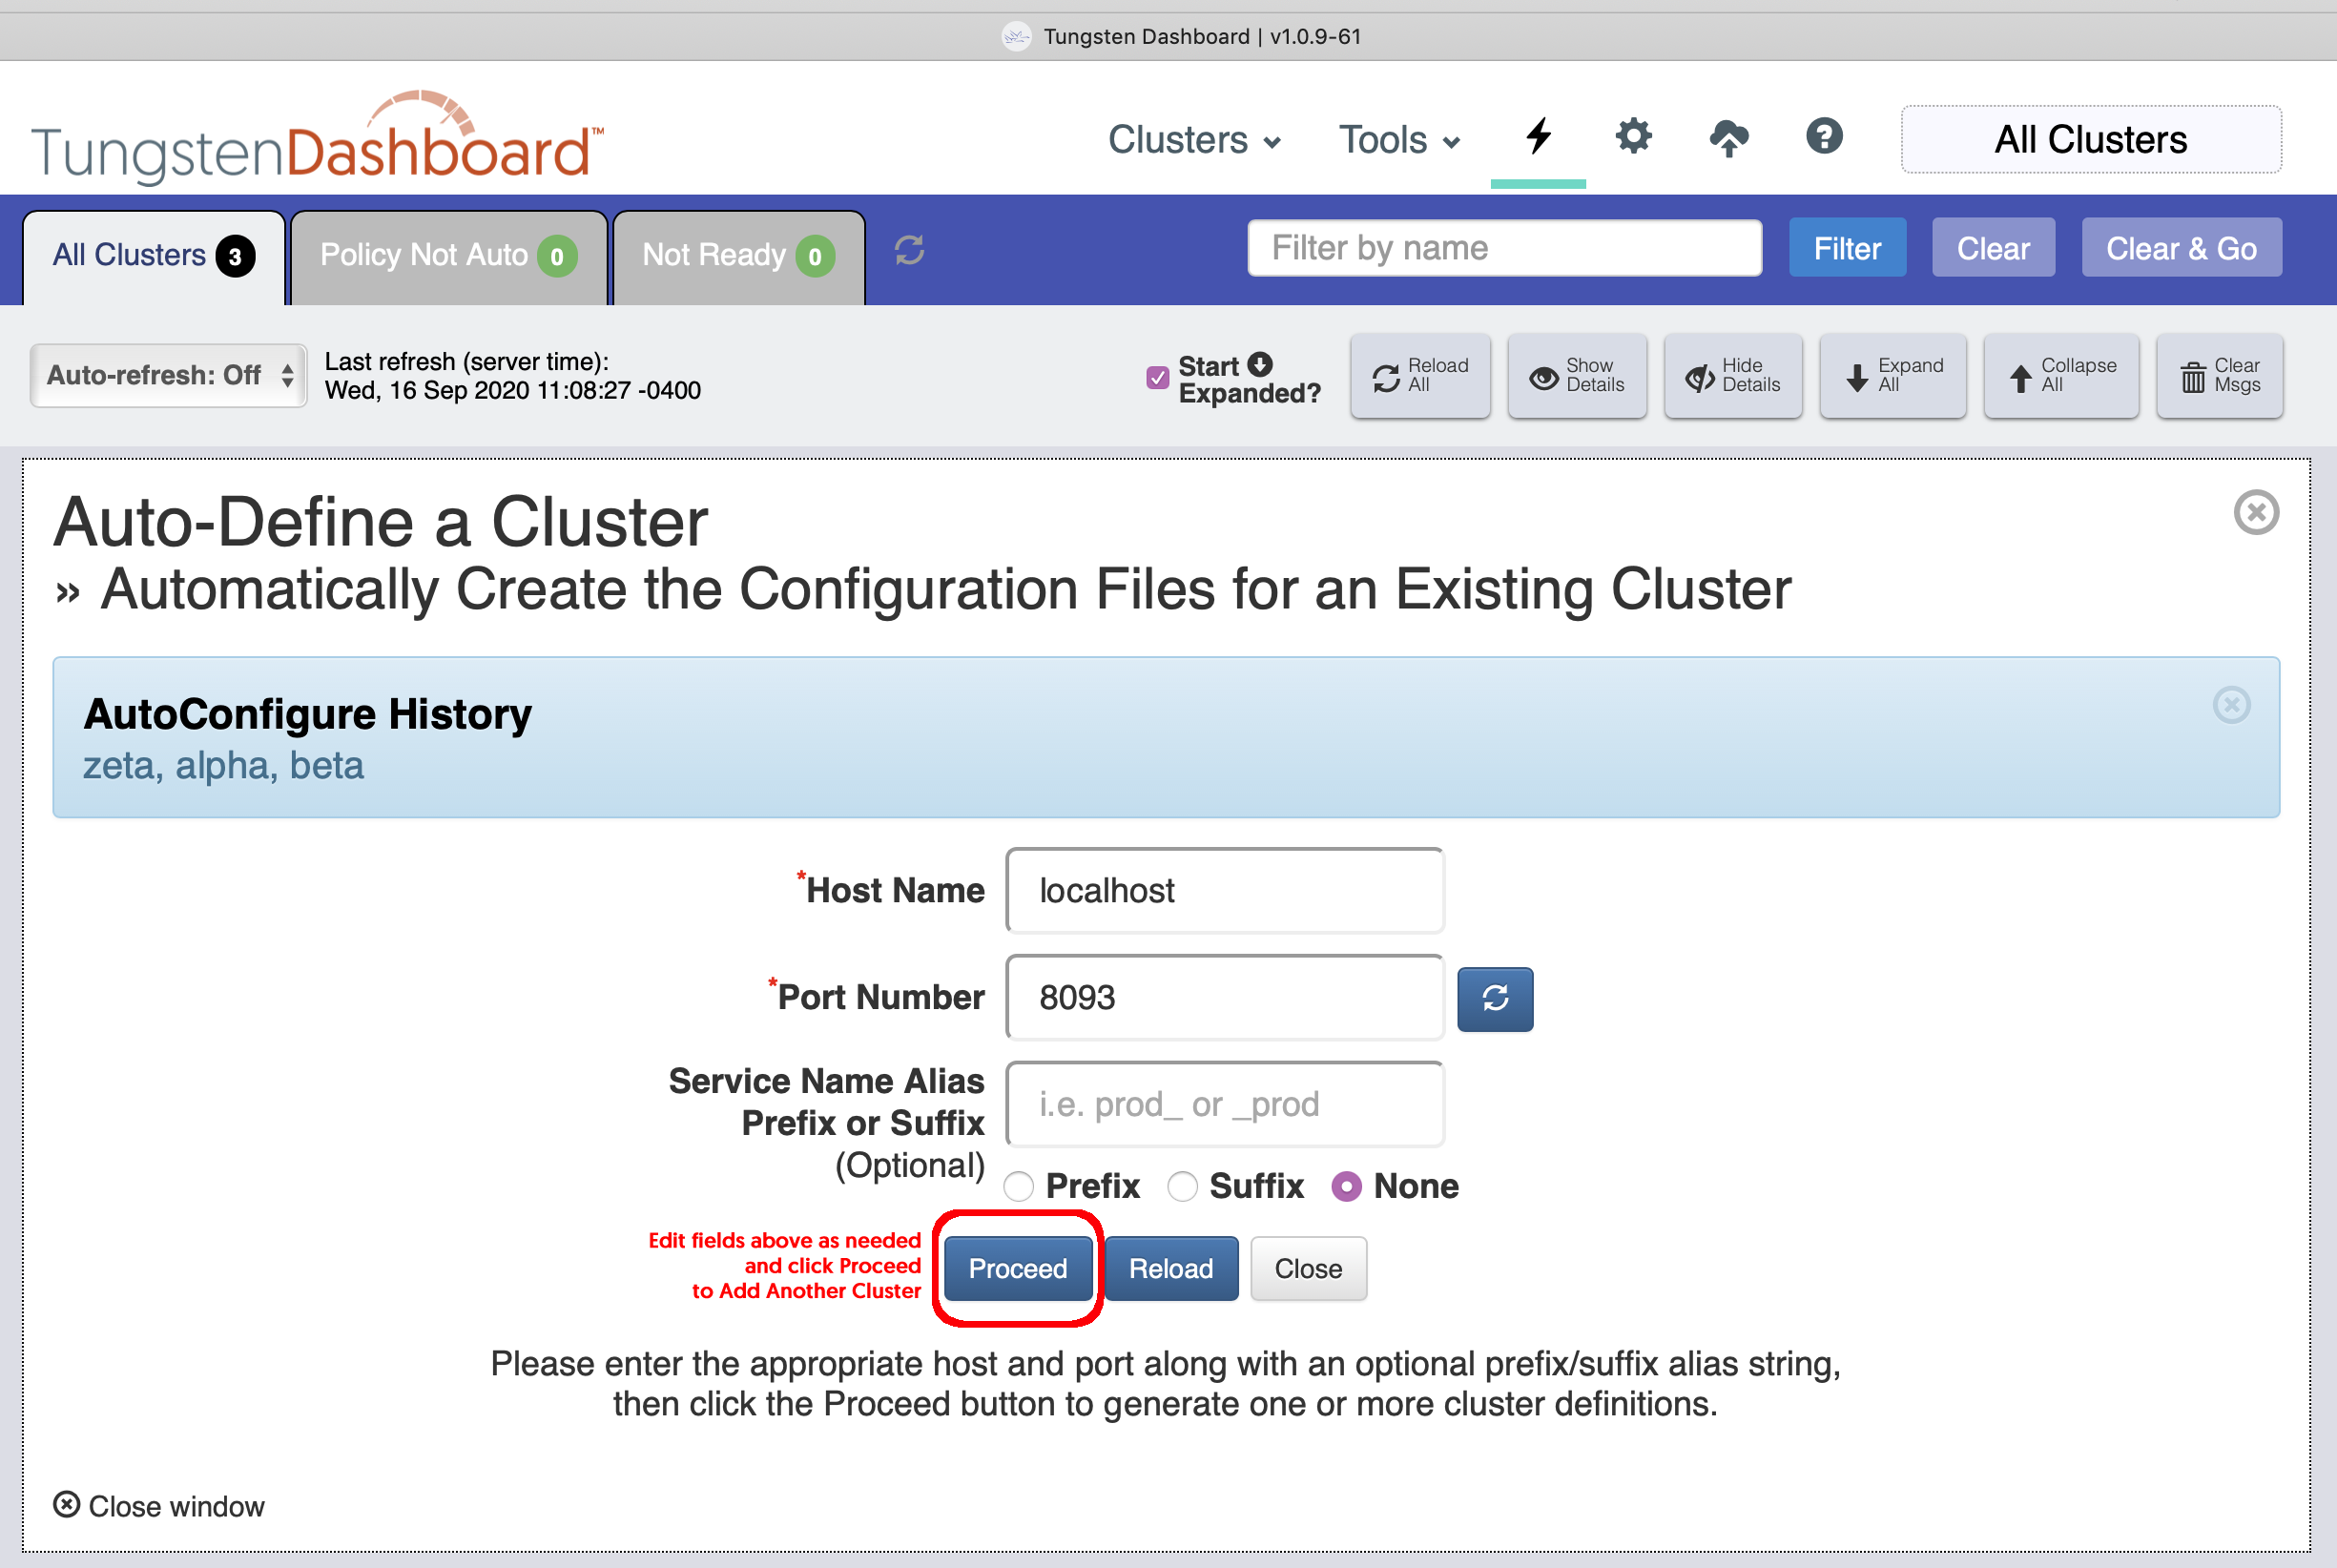 Tungsten Dashboard Auto-Define a Cluster Form after the Refresh button has been clicked